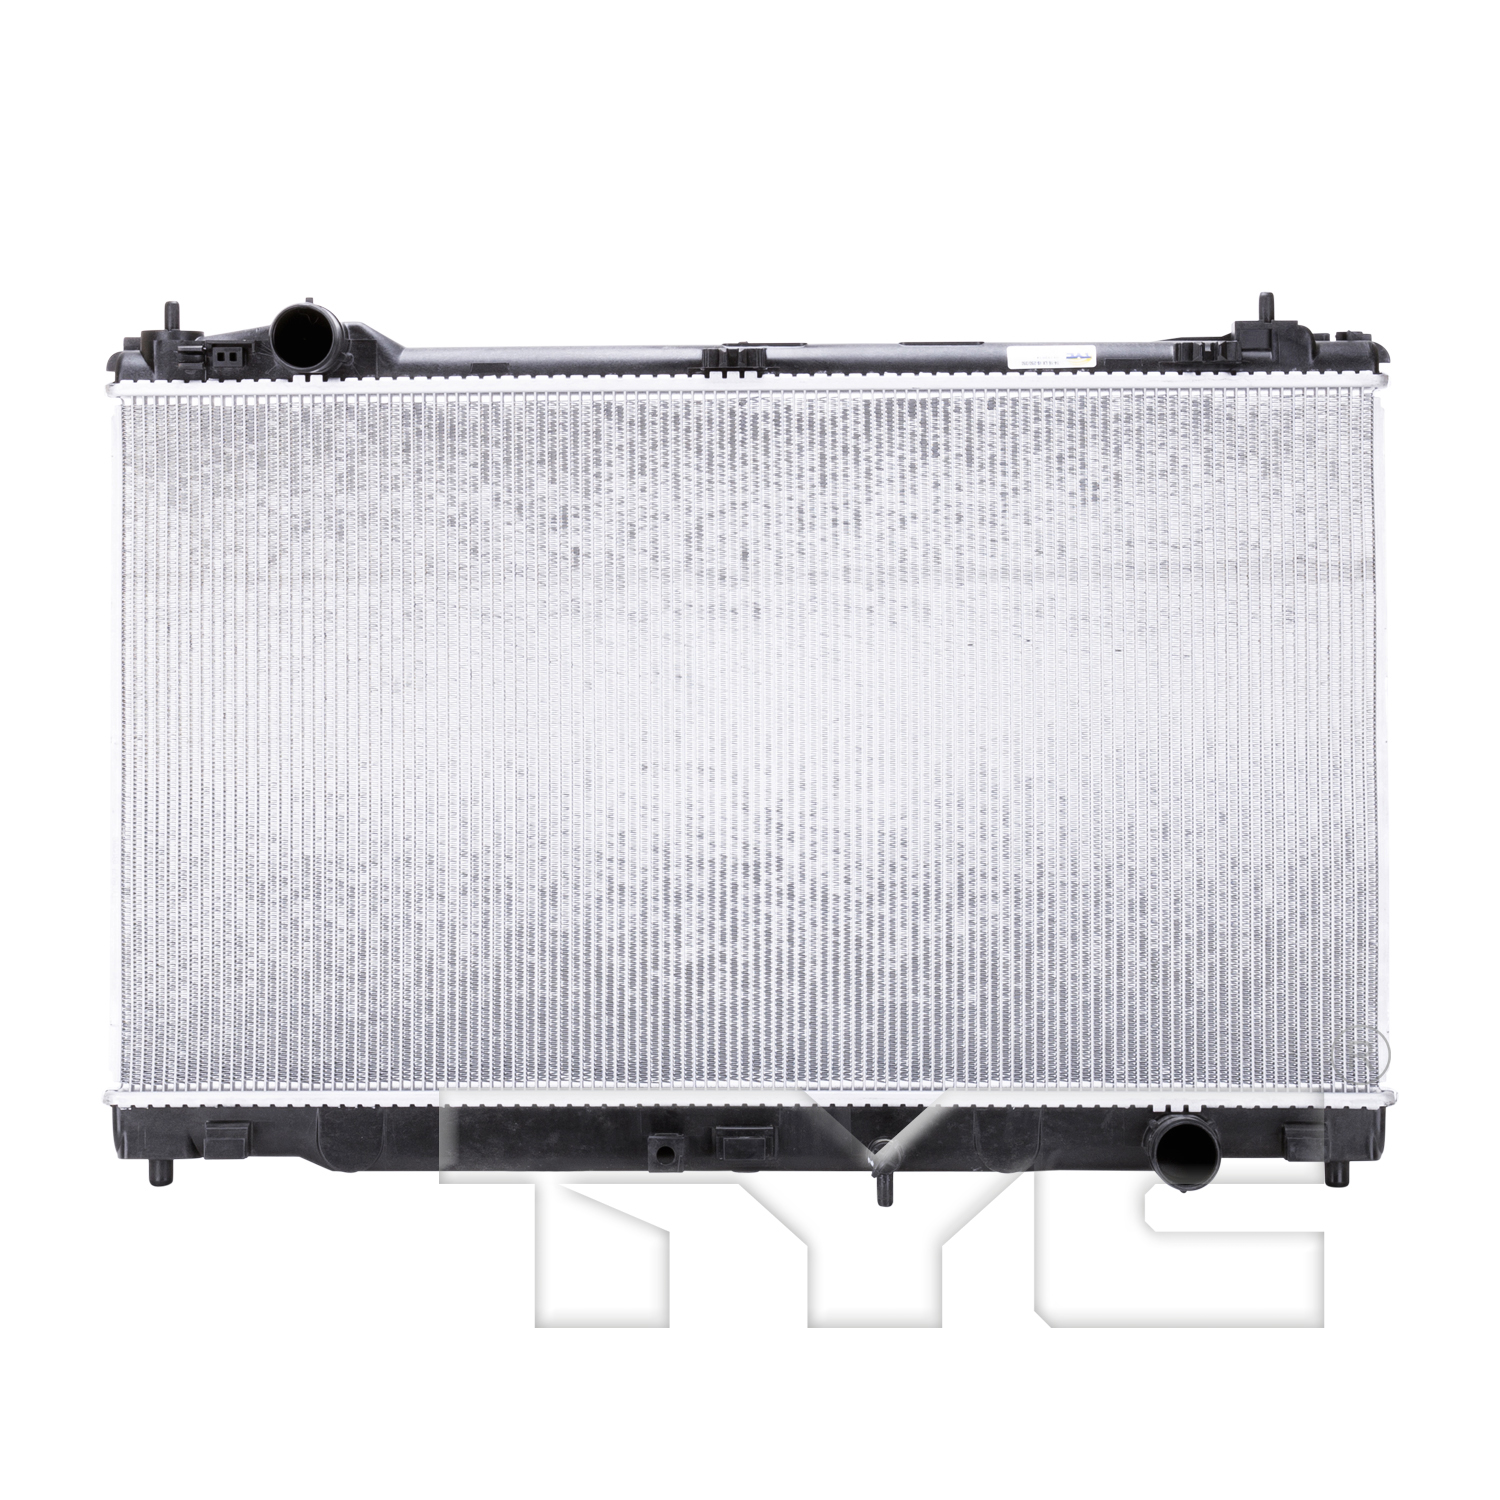 Aftermarket RADIATORS for LEXUS - IS350, IS350,14-17,Radiator assembly